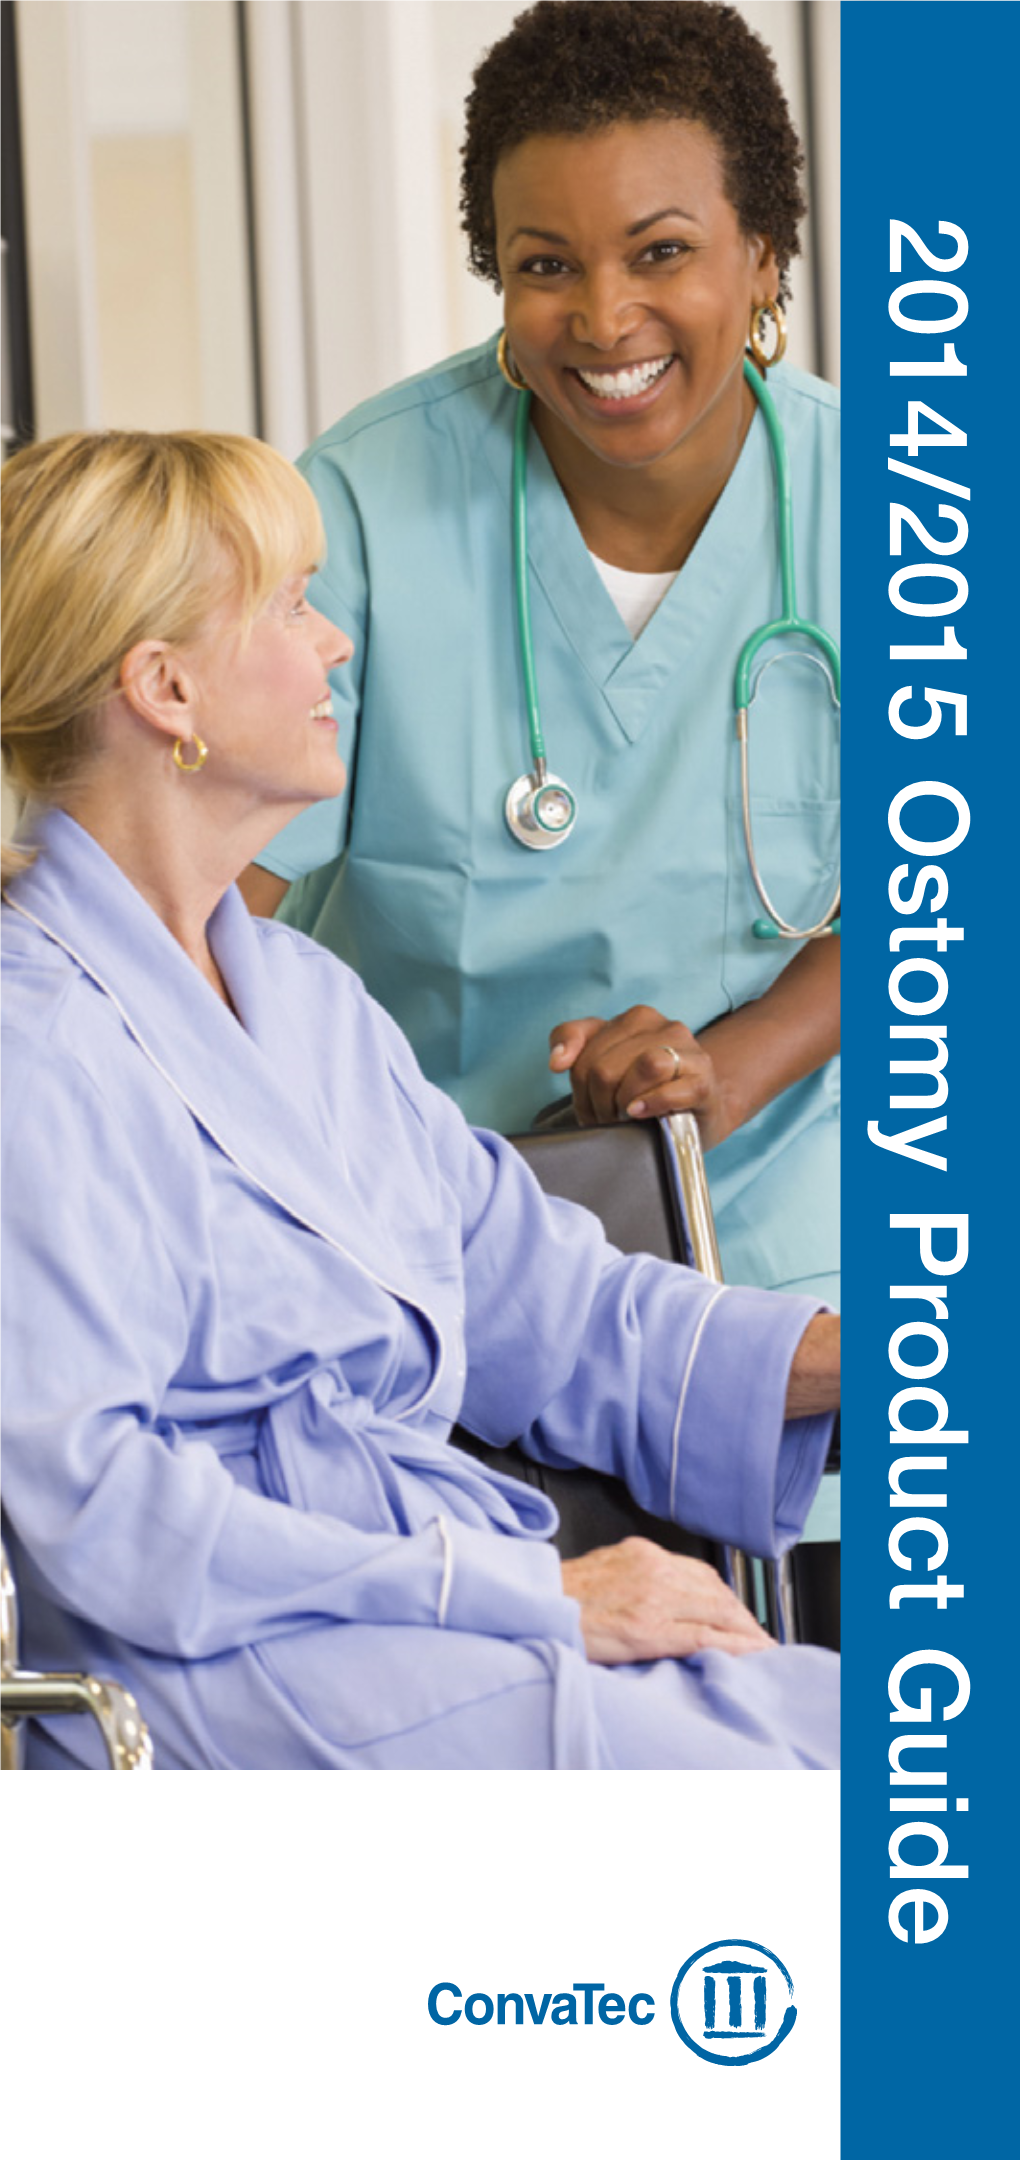 2014/2015 Ostomy Product Guide